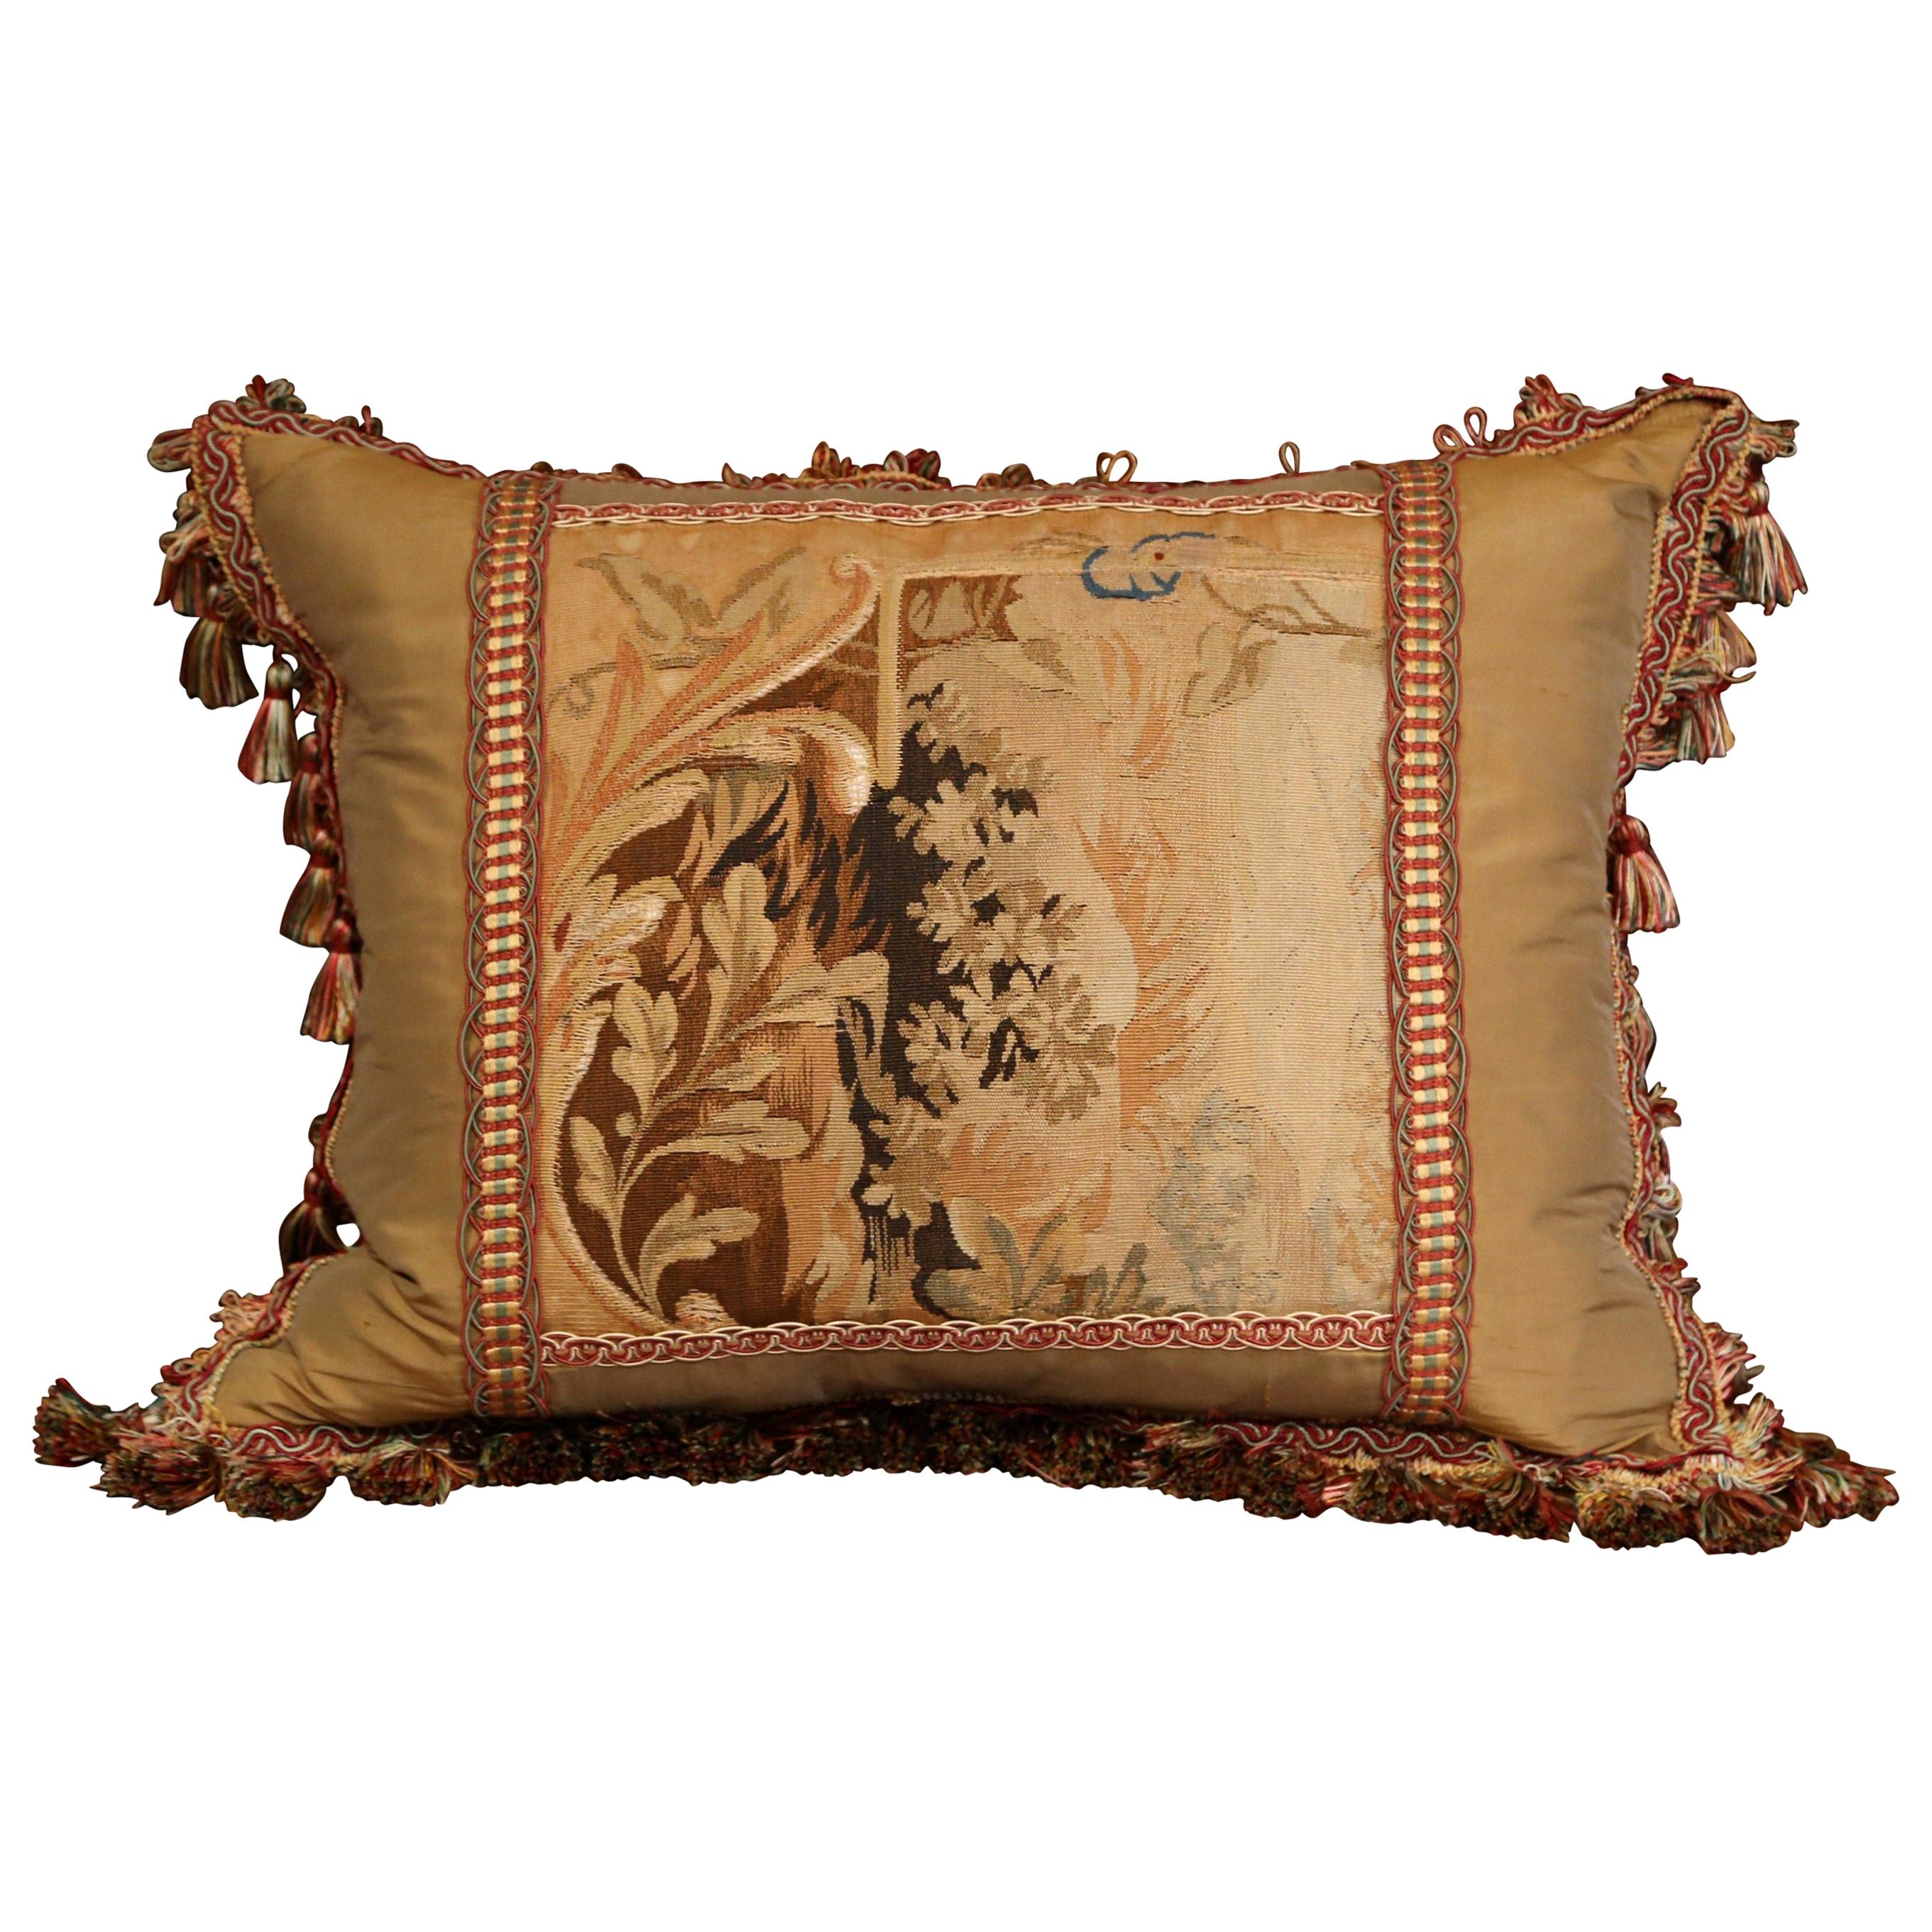 Handmade French Pillow with 19th Century Aubusson Verdure Tapestry Fragment